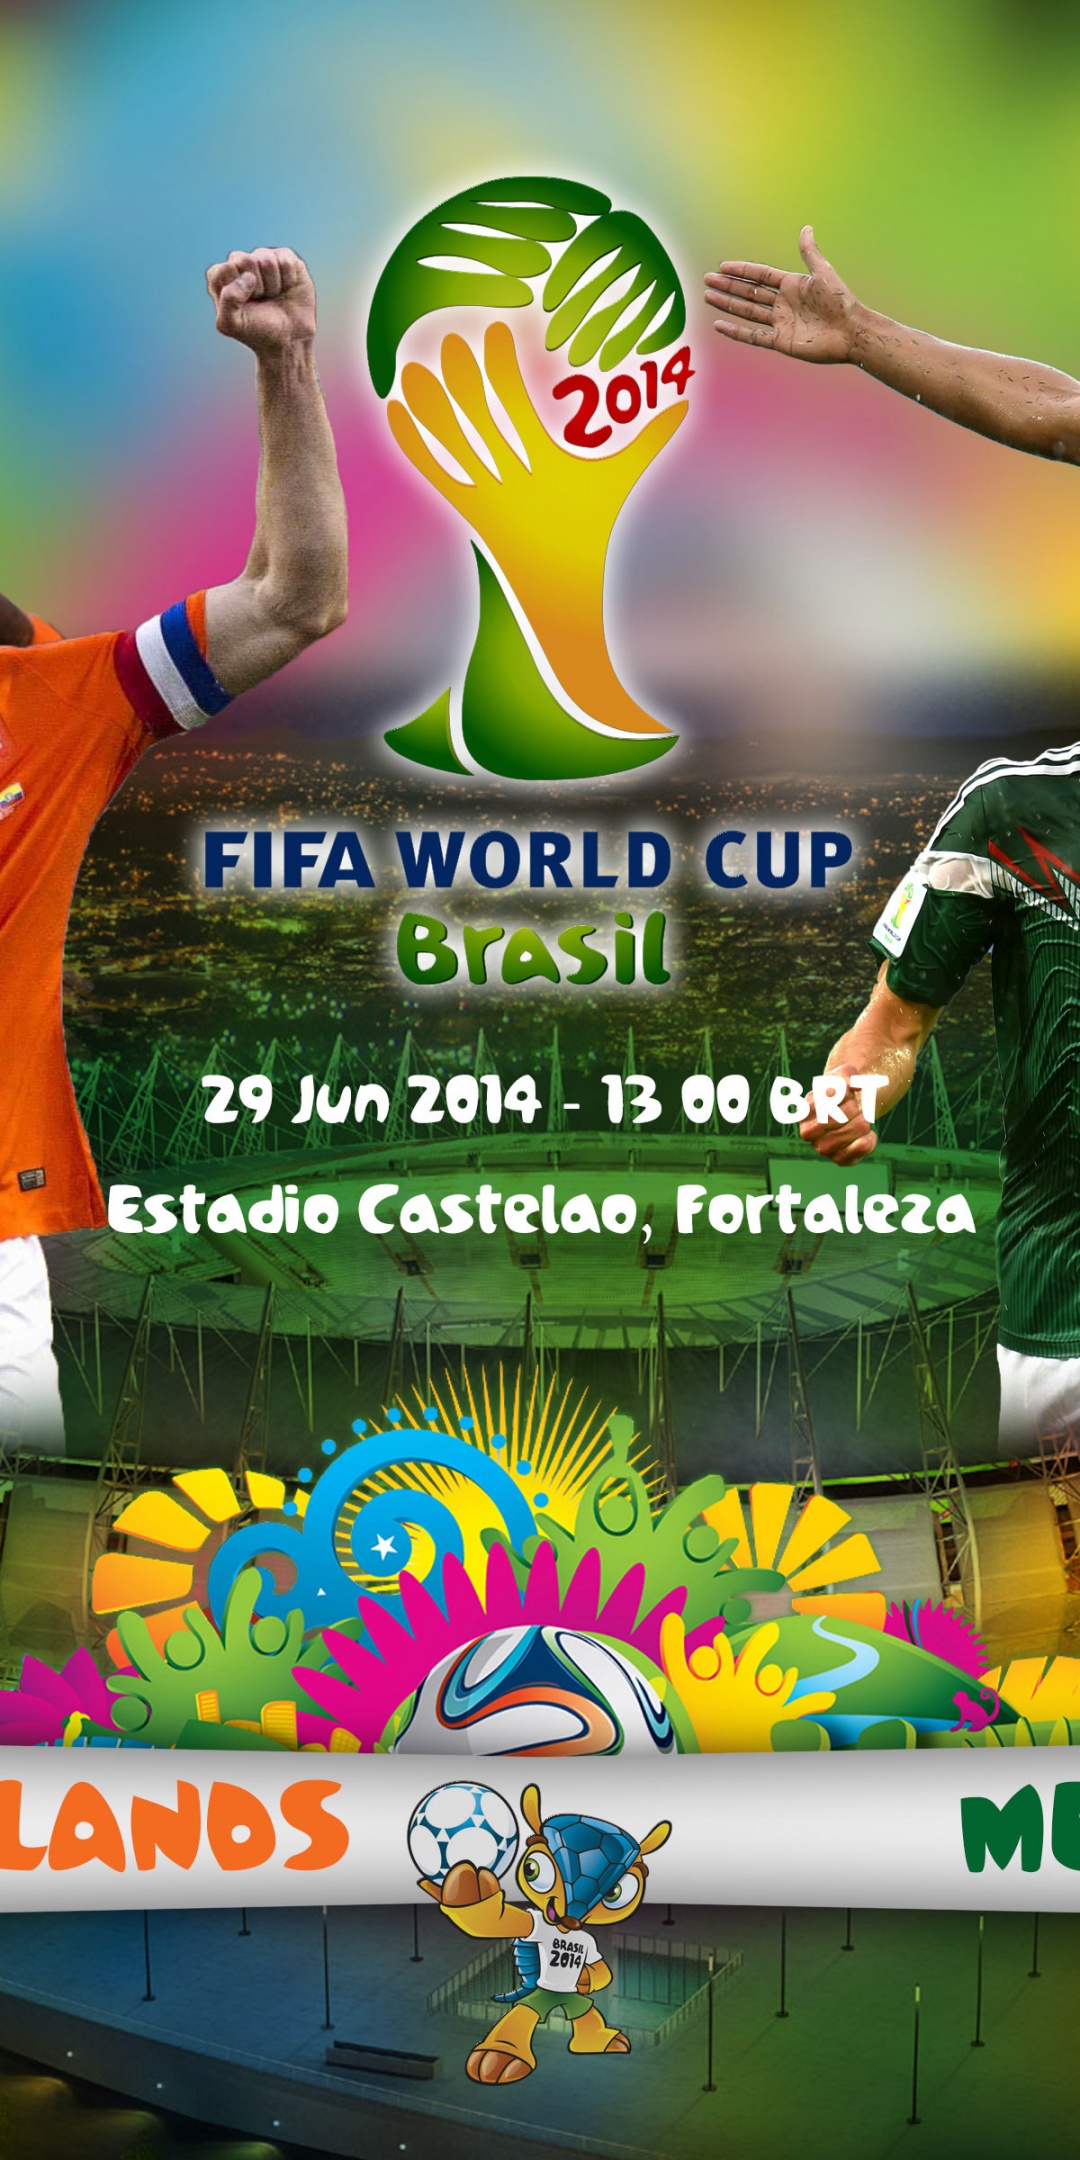 Netherlands Vs Mexico World Cup 2014